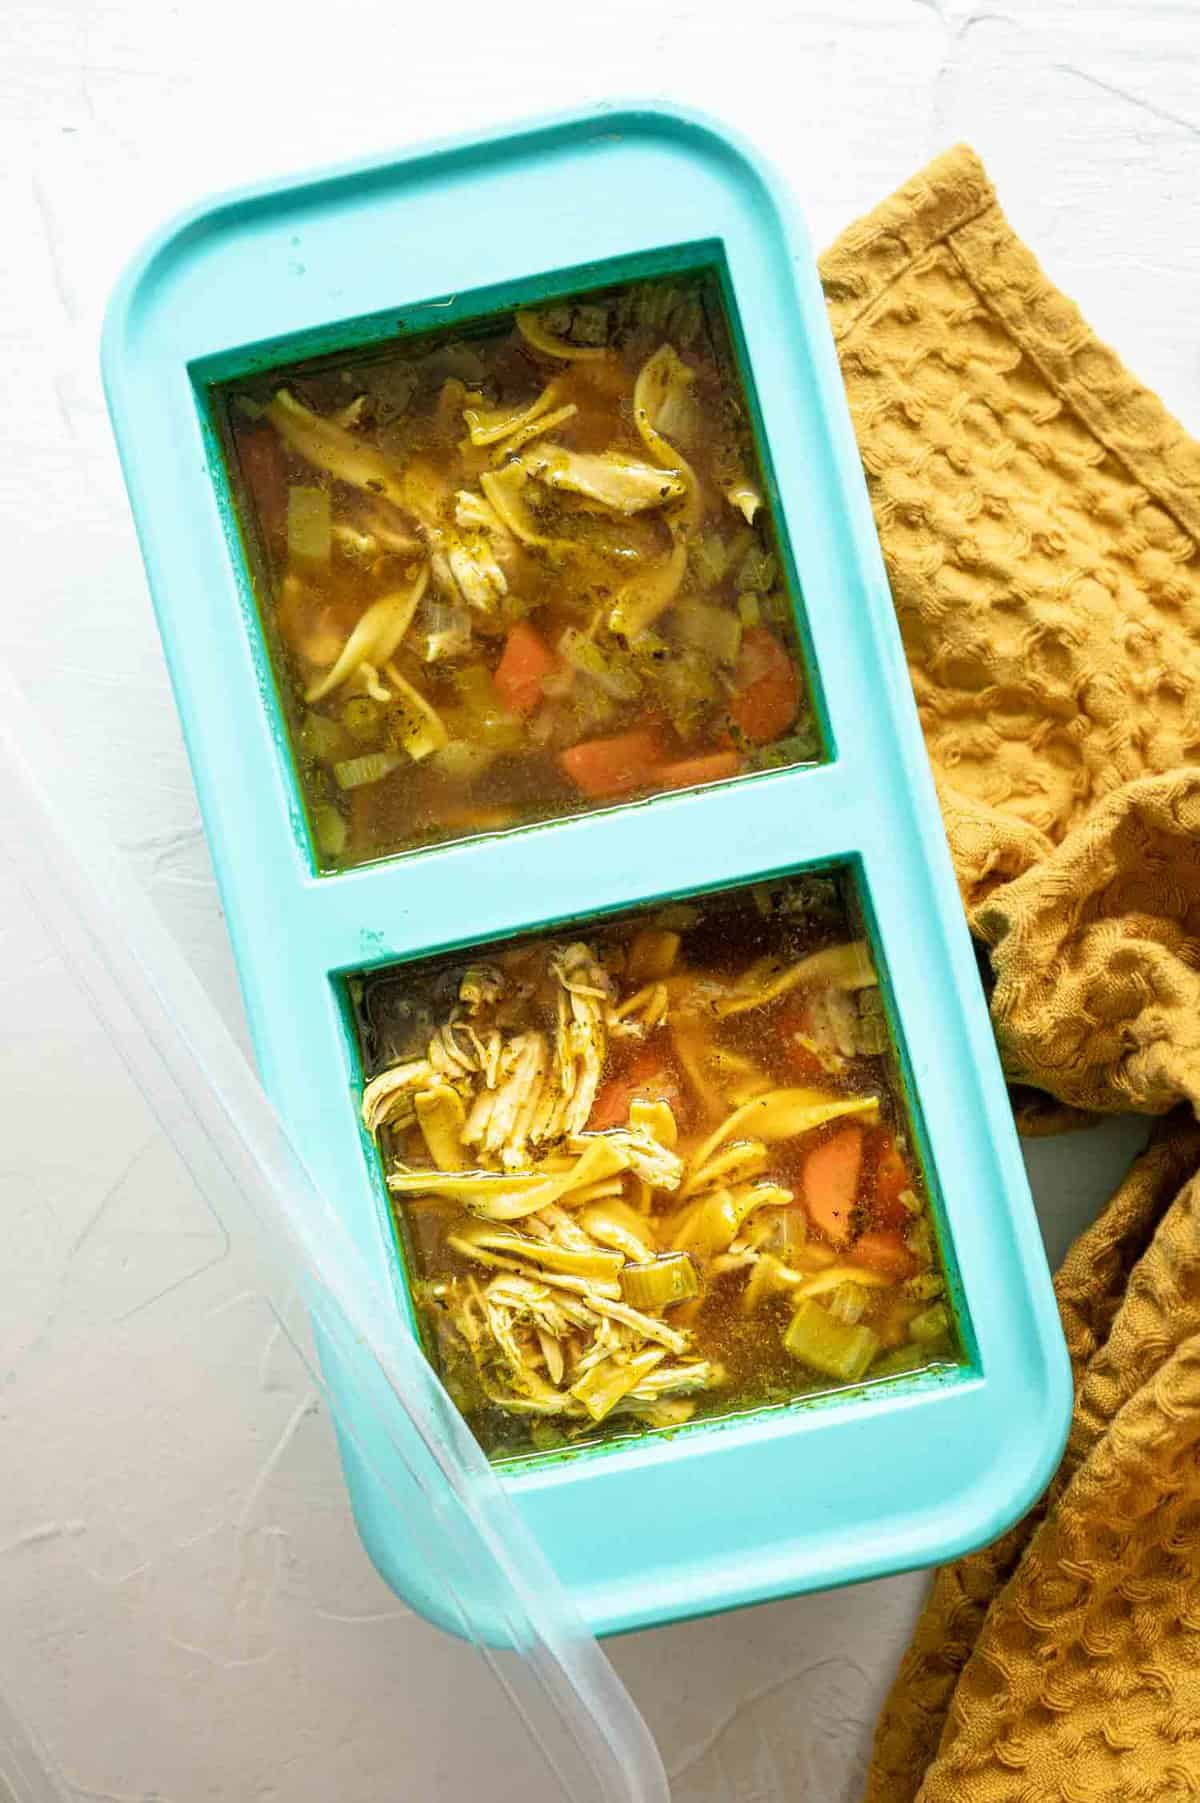 Homemade chicken noodle soup in Souper Cubes to freeze individual portions.